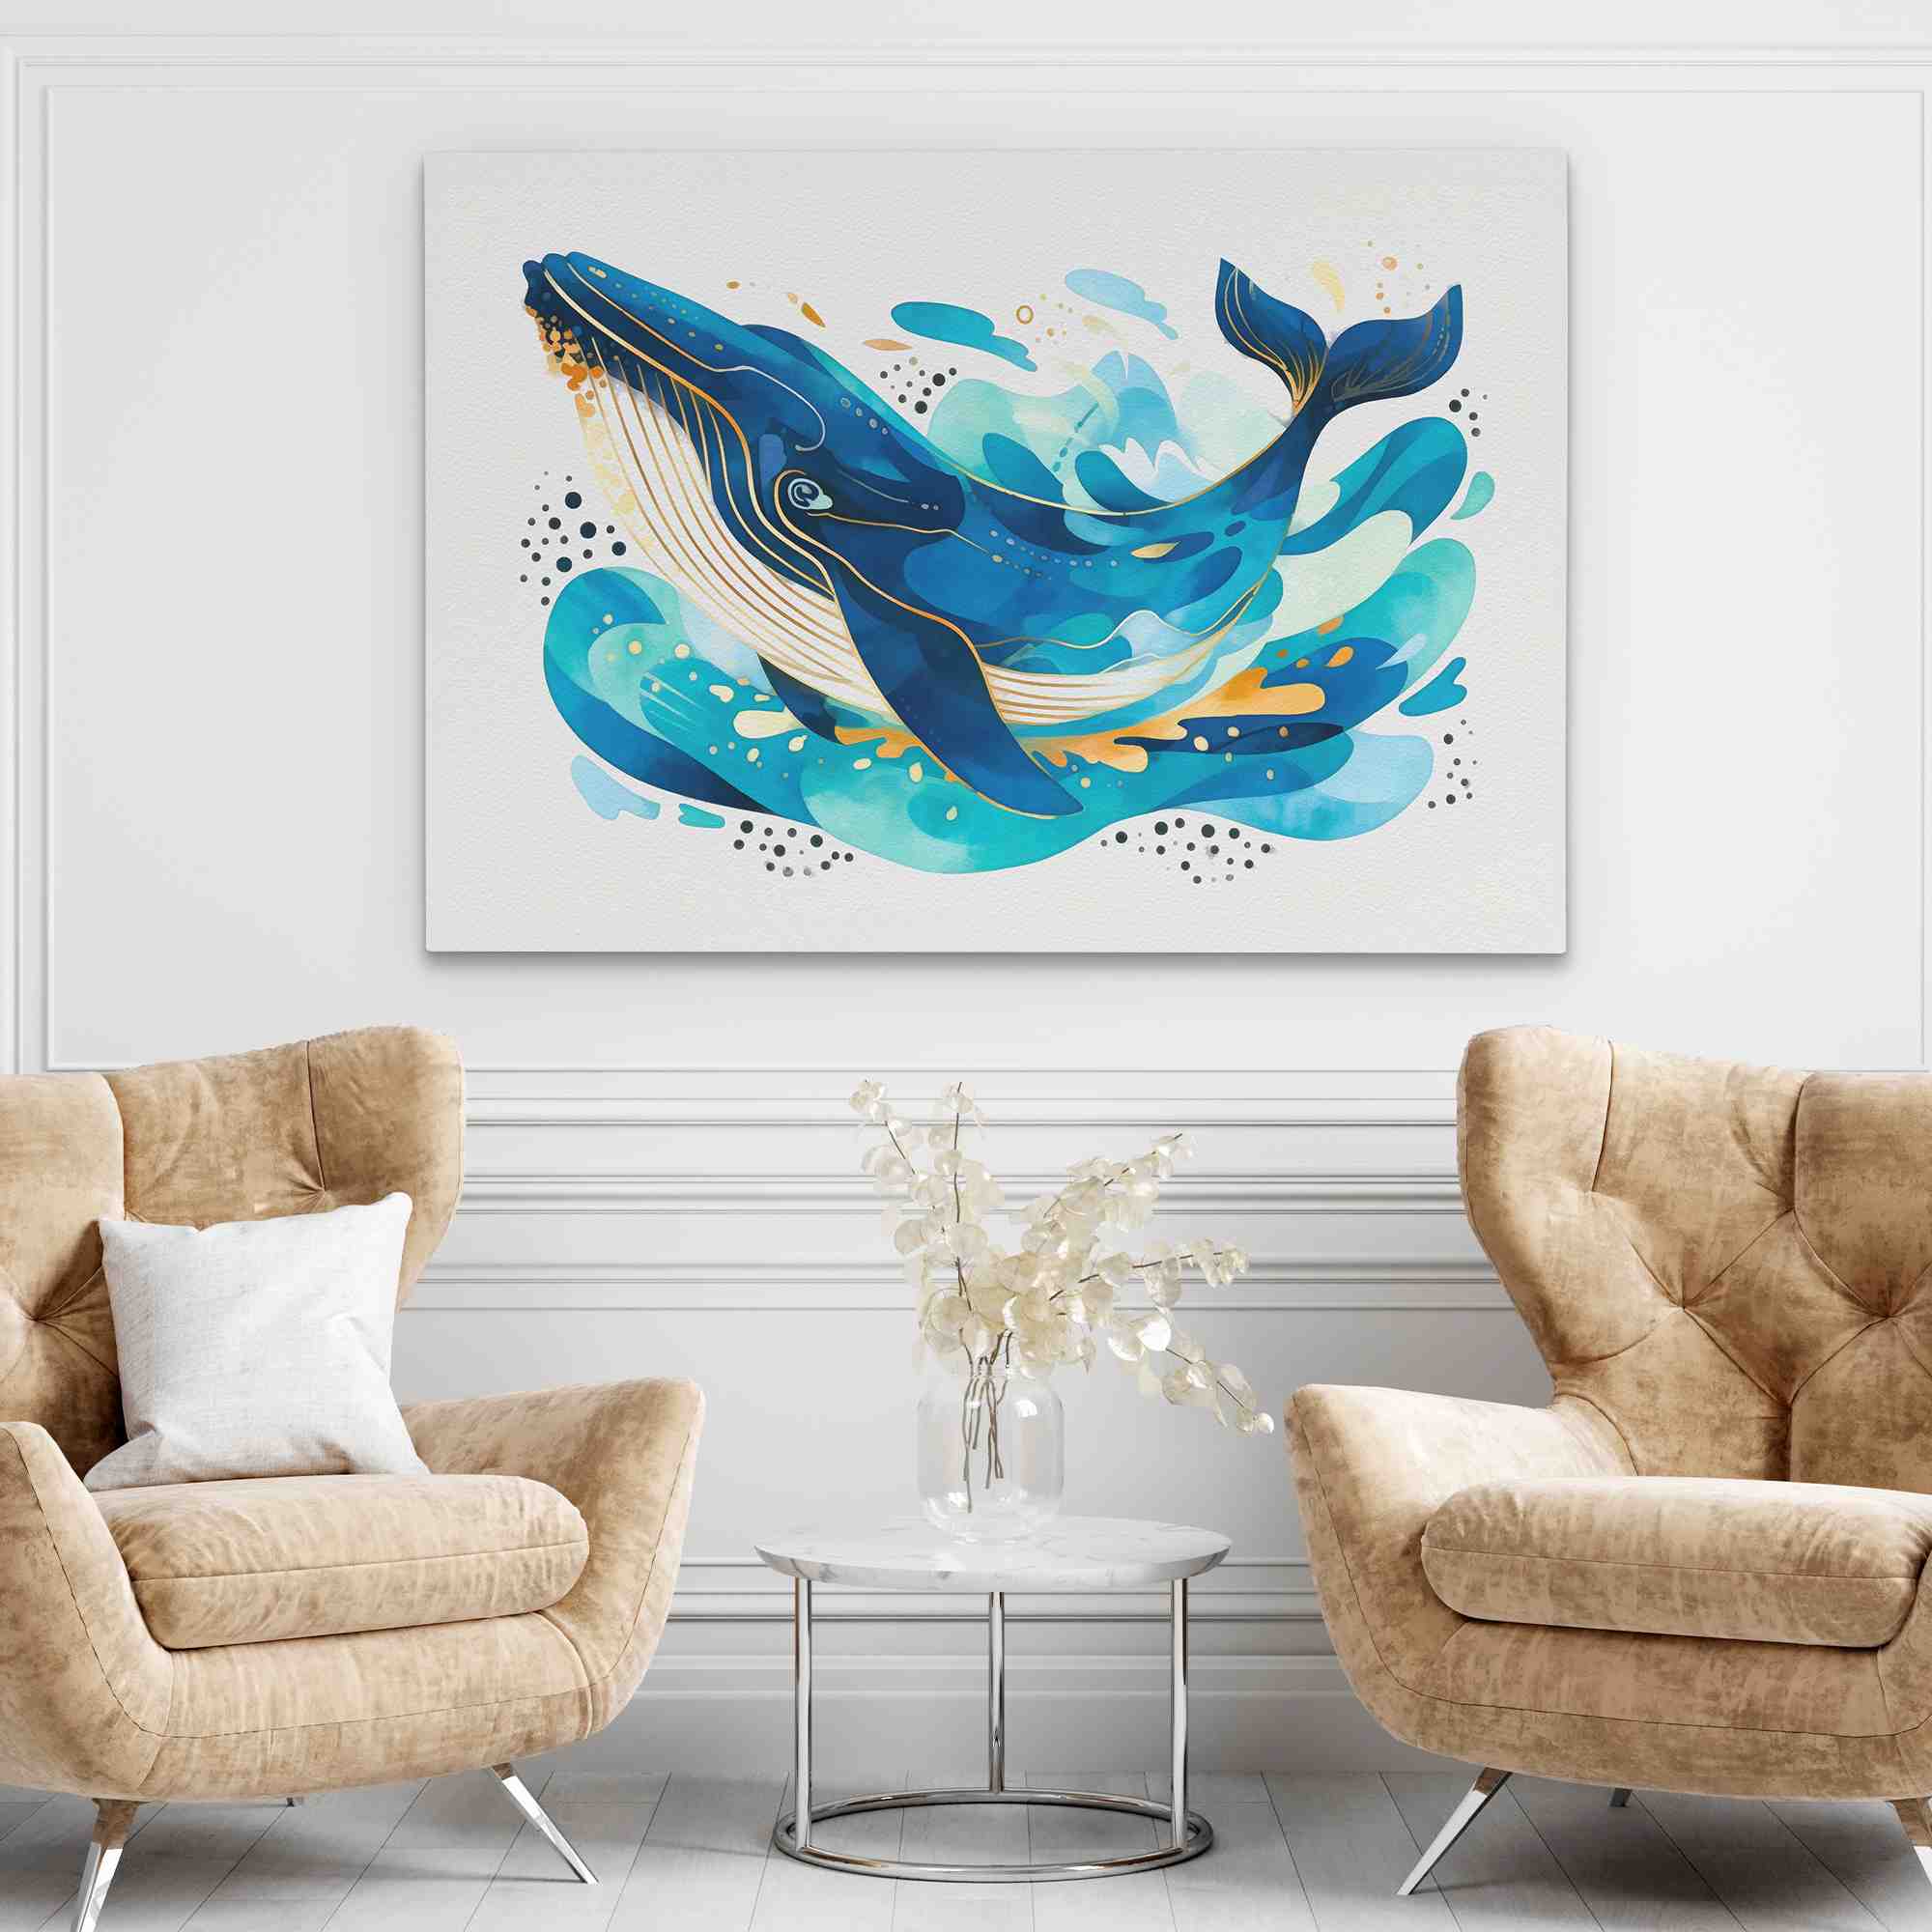 a painting of a blue whale on a white background